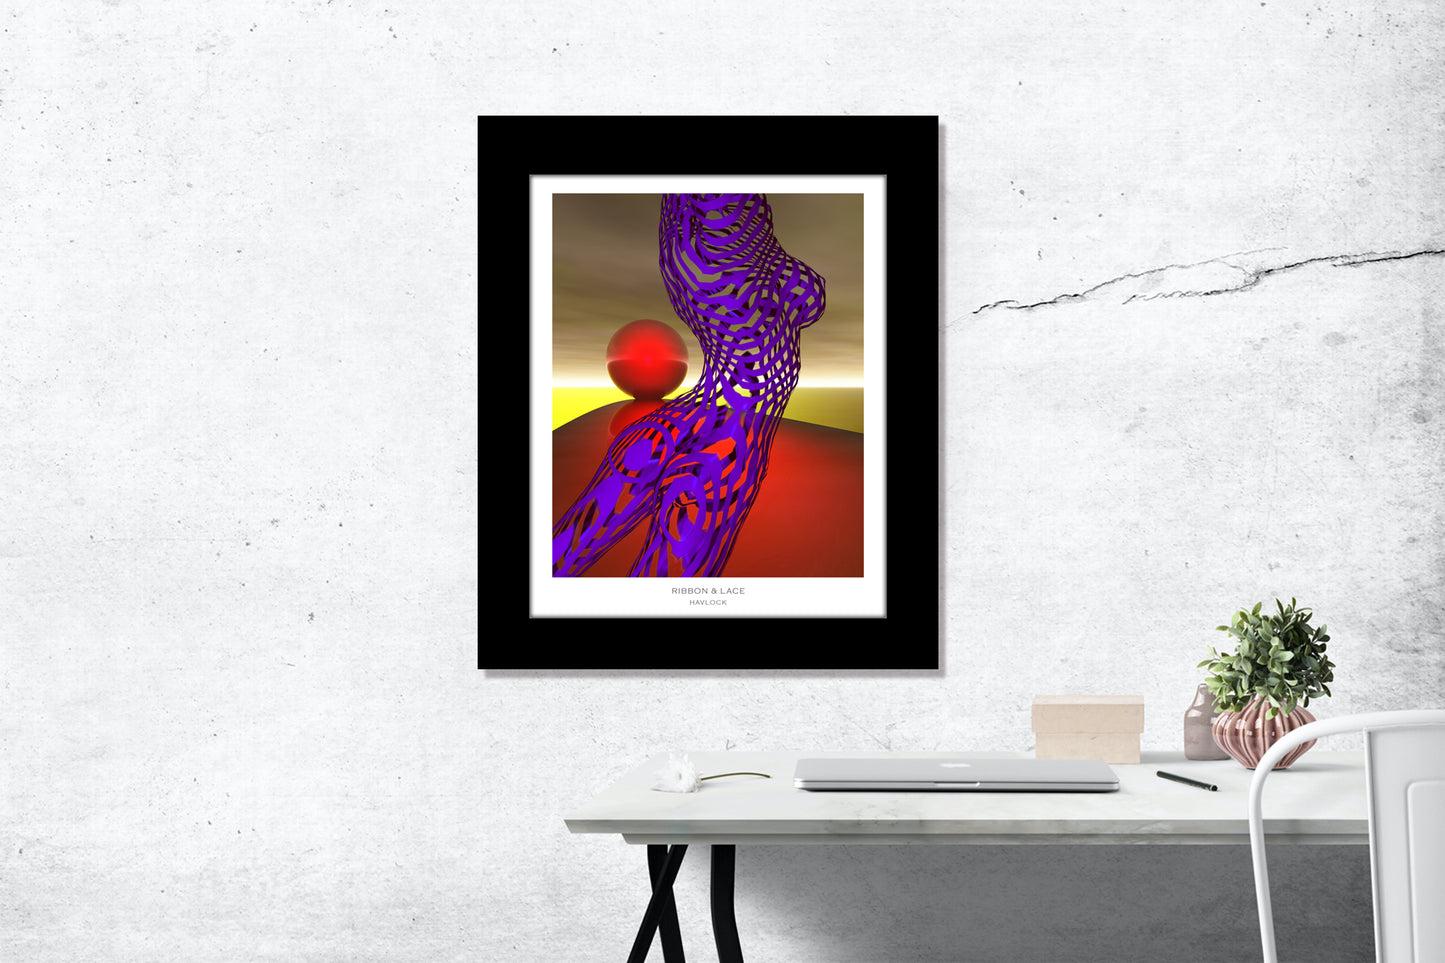 Ribbon & Lace ~ Alchemic Anatomy - 8x10 Print in Collector's Sleeve